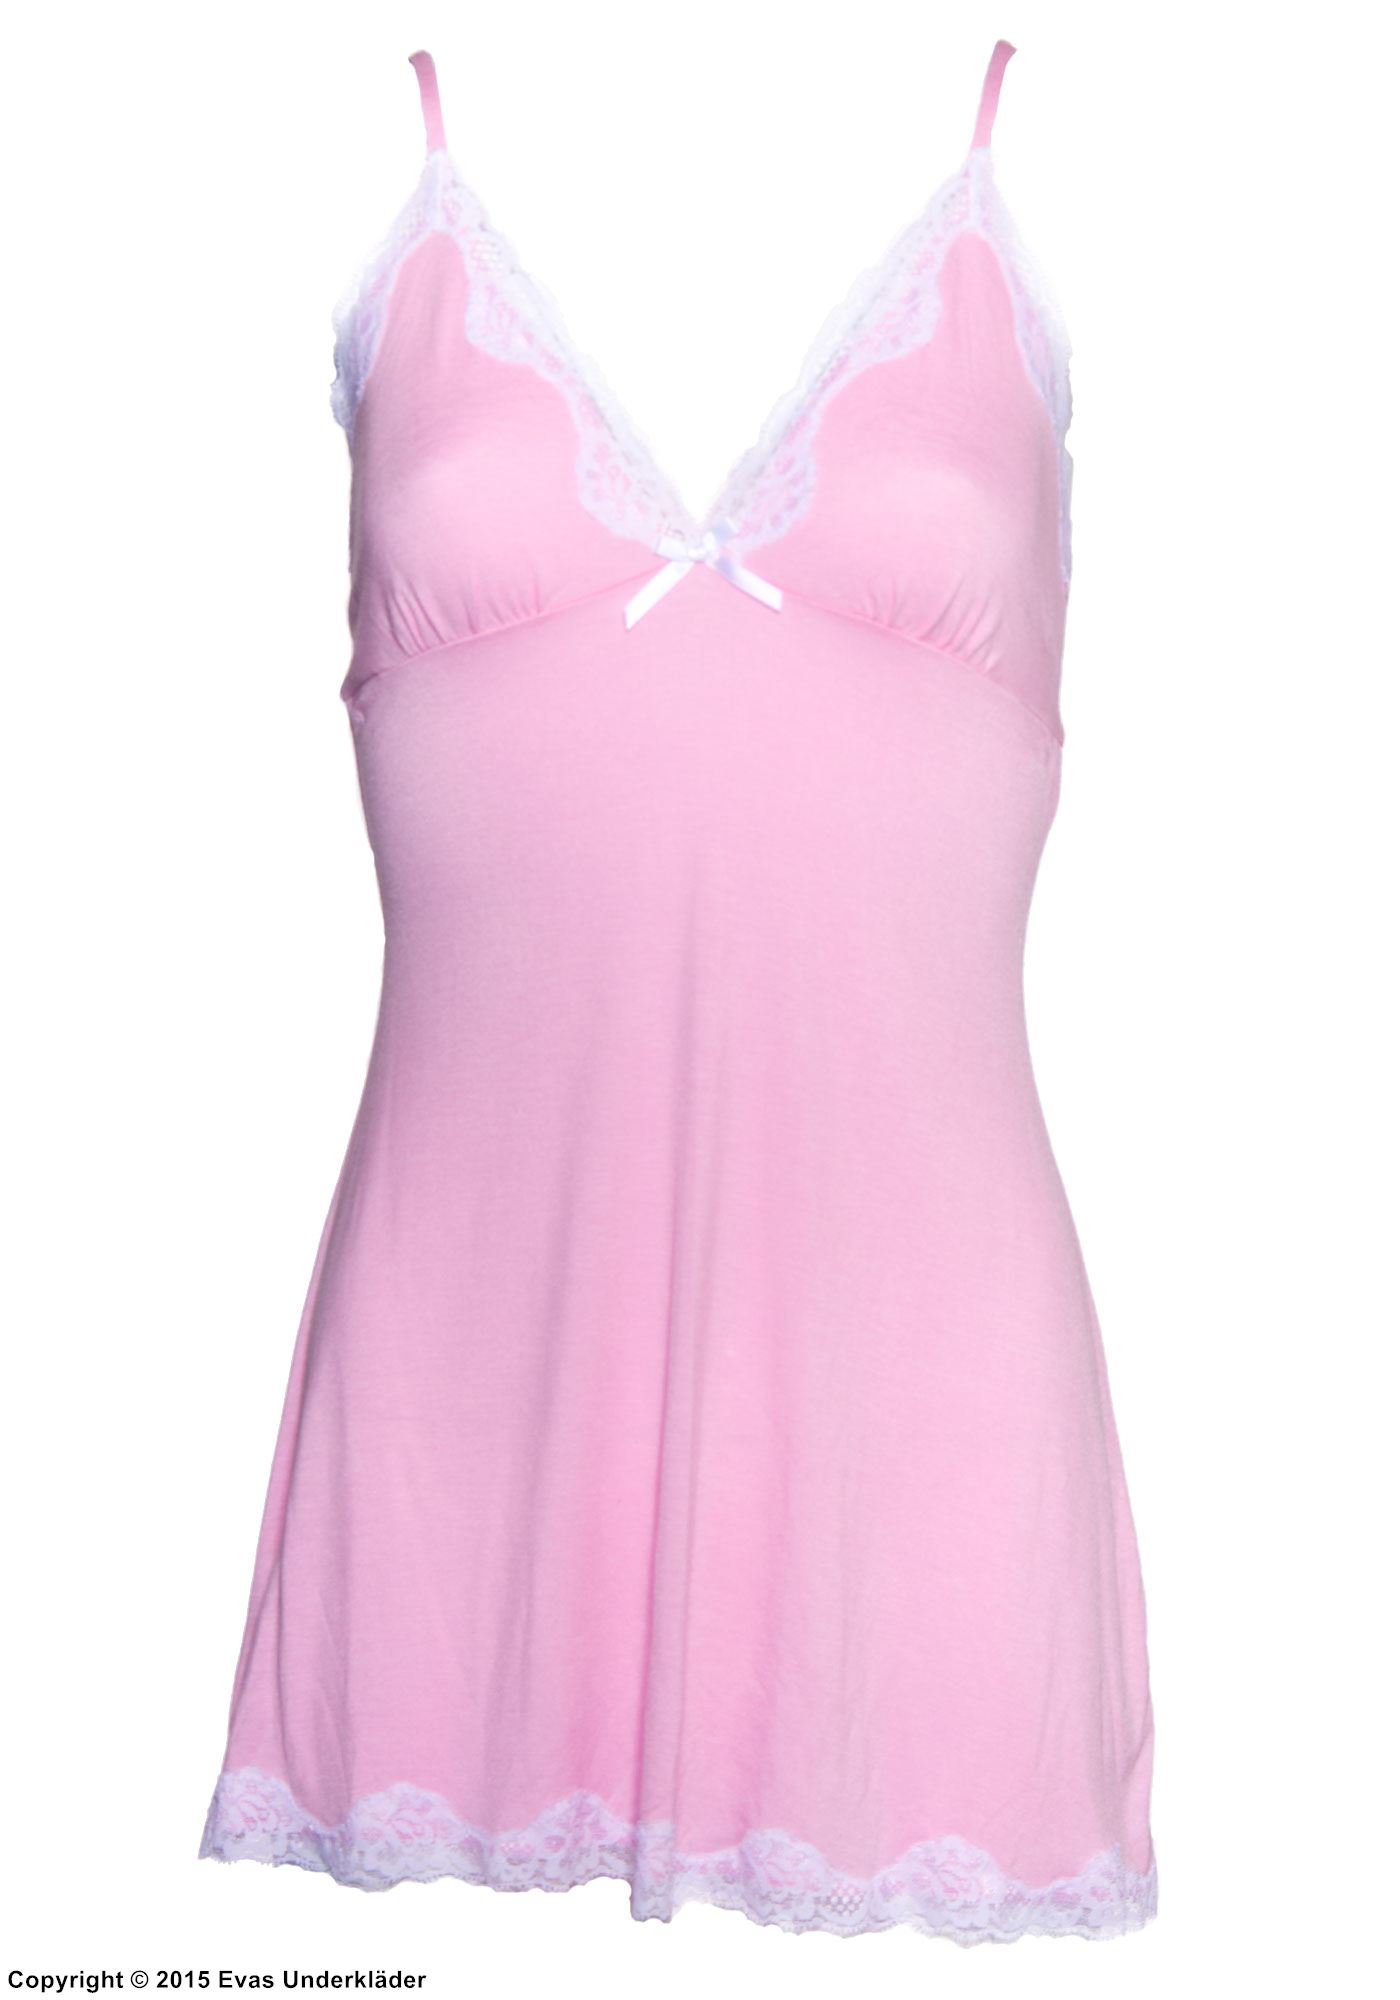 Cute chemise with lace borders